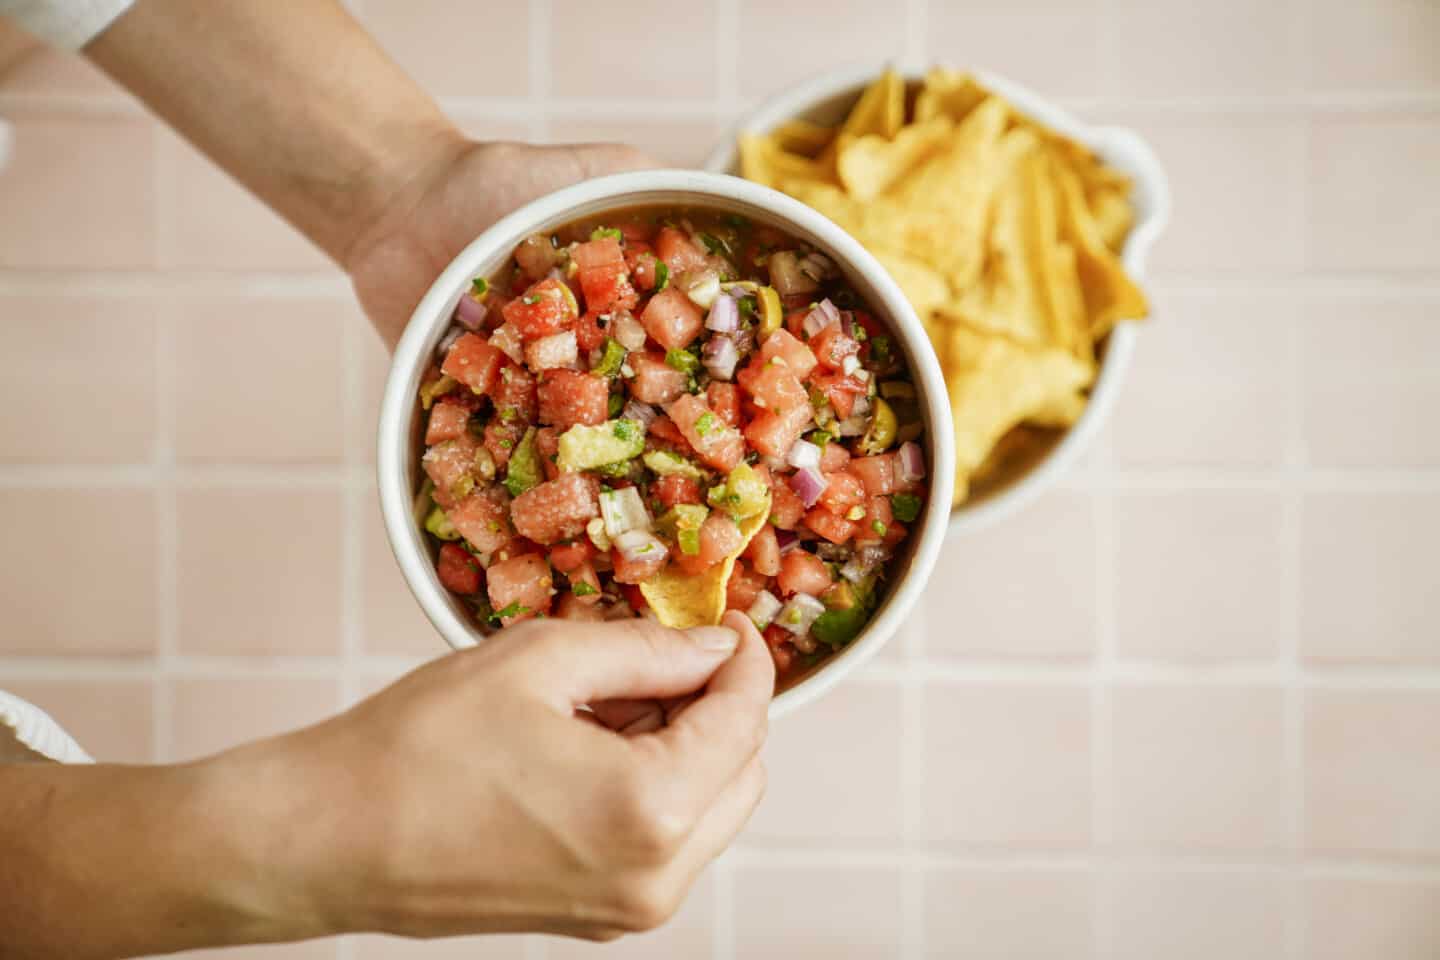 Hand dipping chip into vegan ceviche